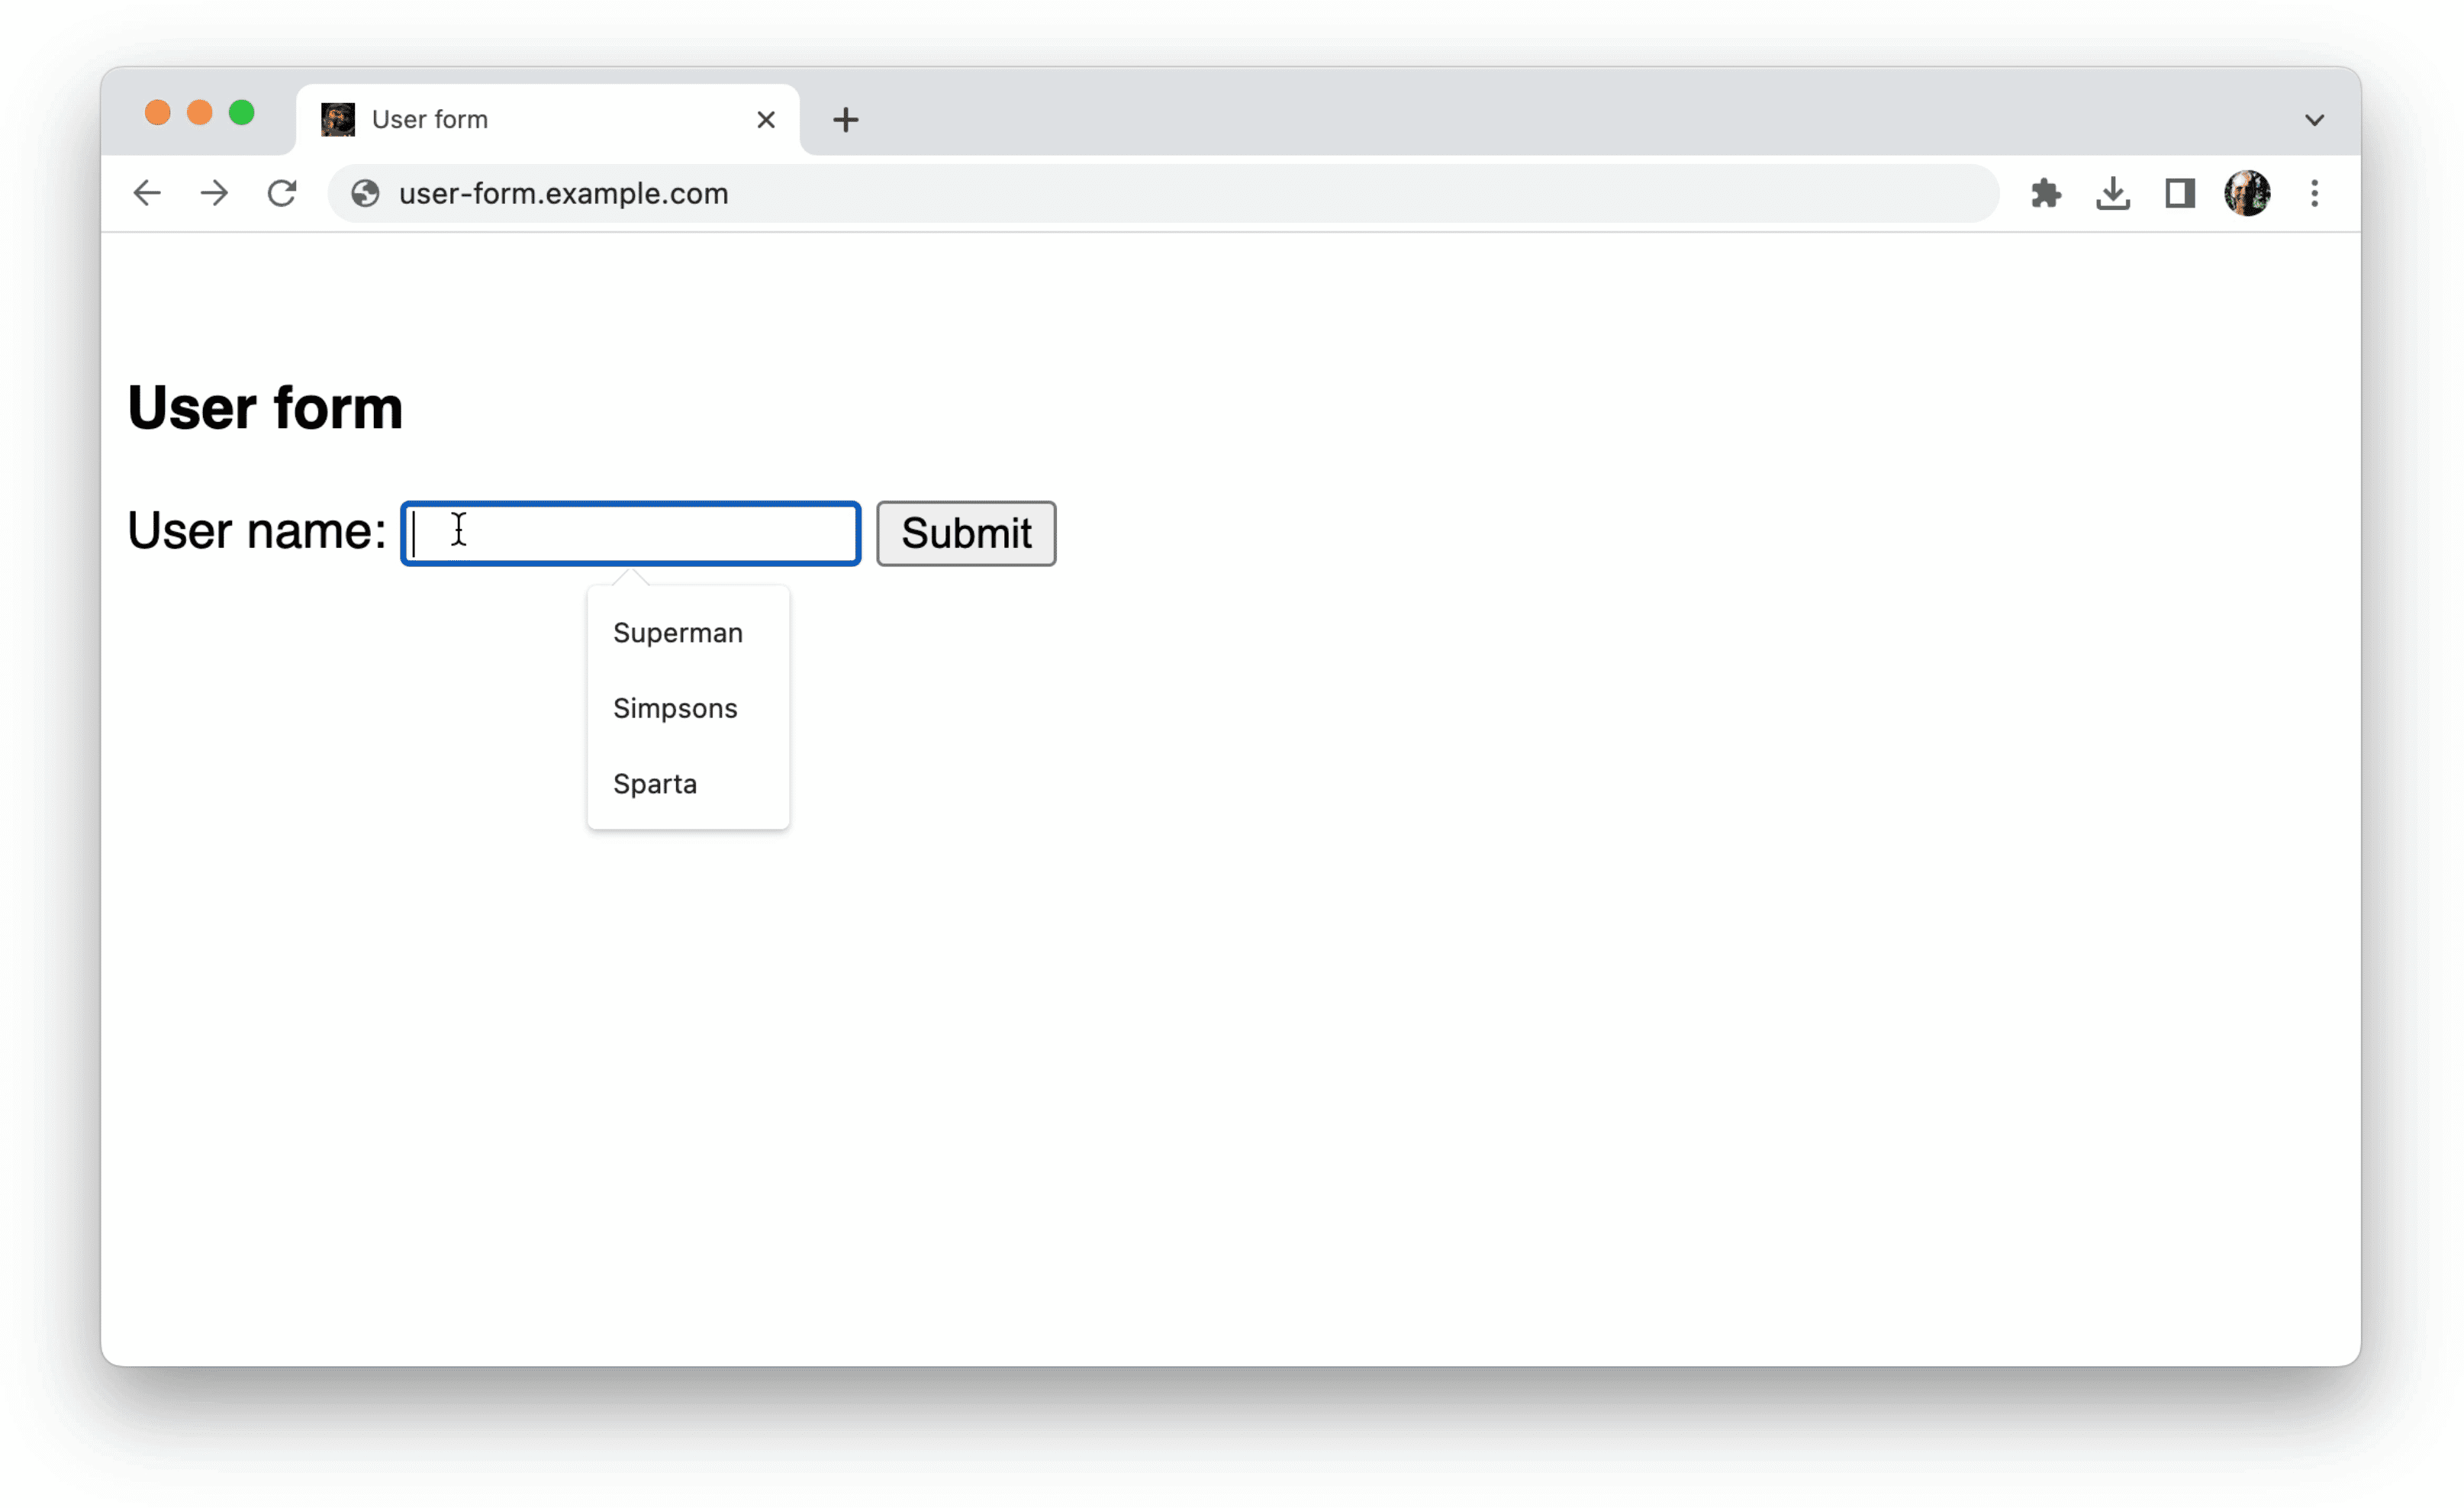 Chrome offering
suggestions for unstructured data in a single form field